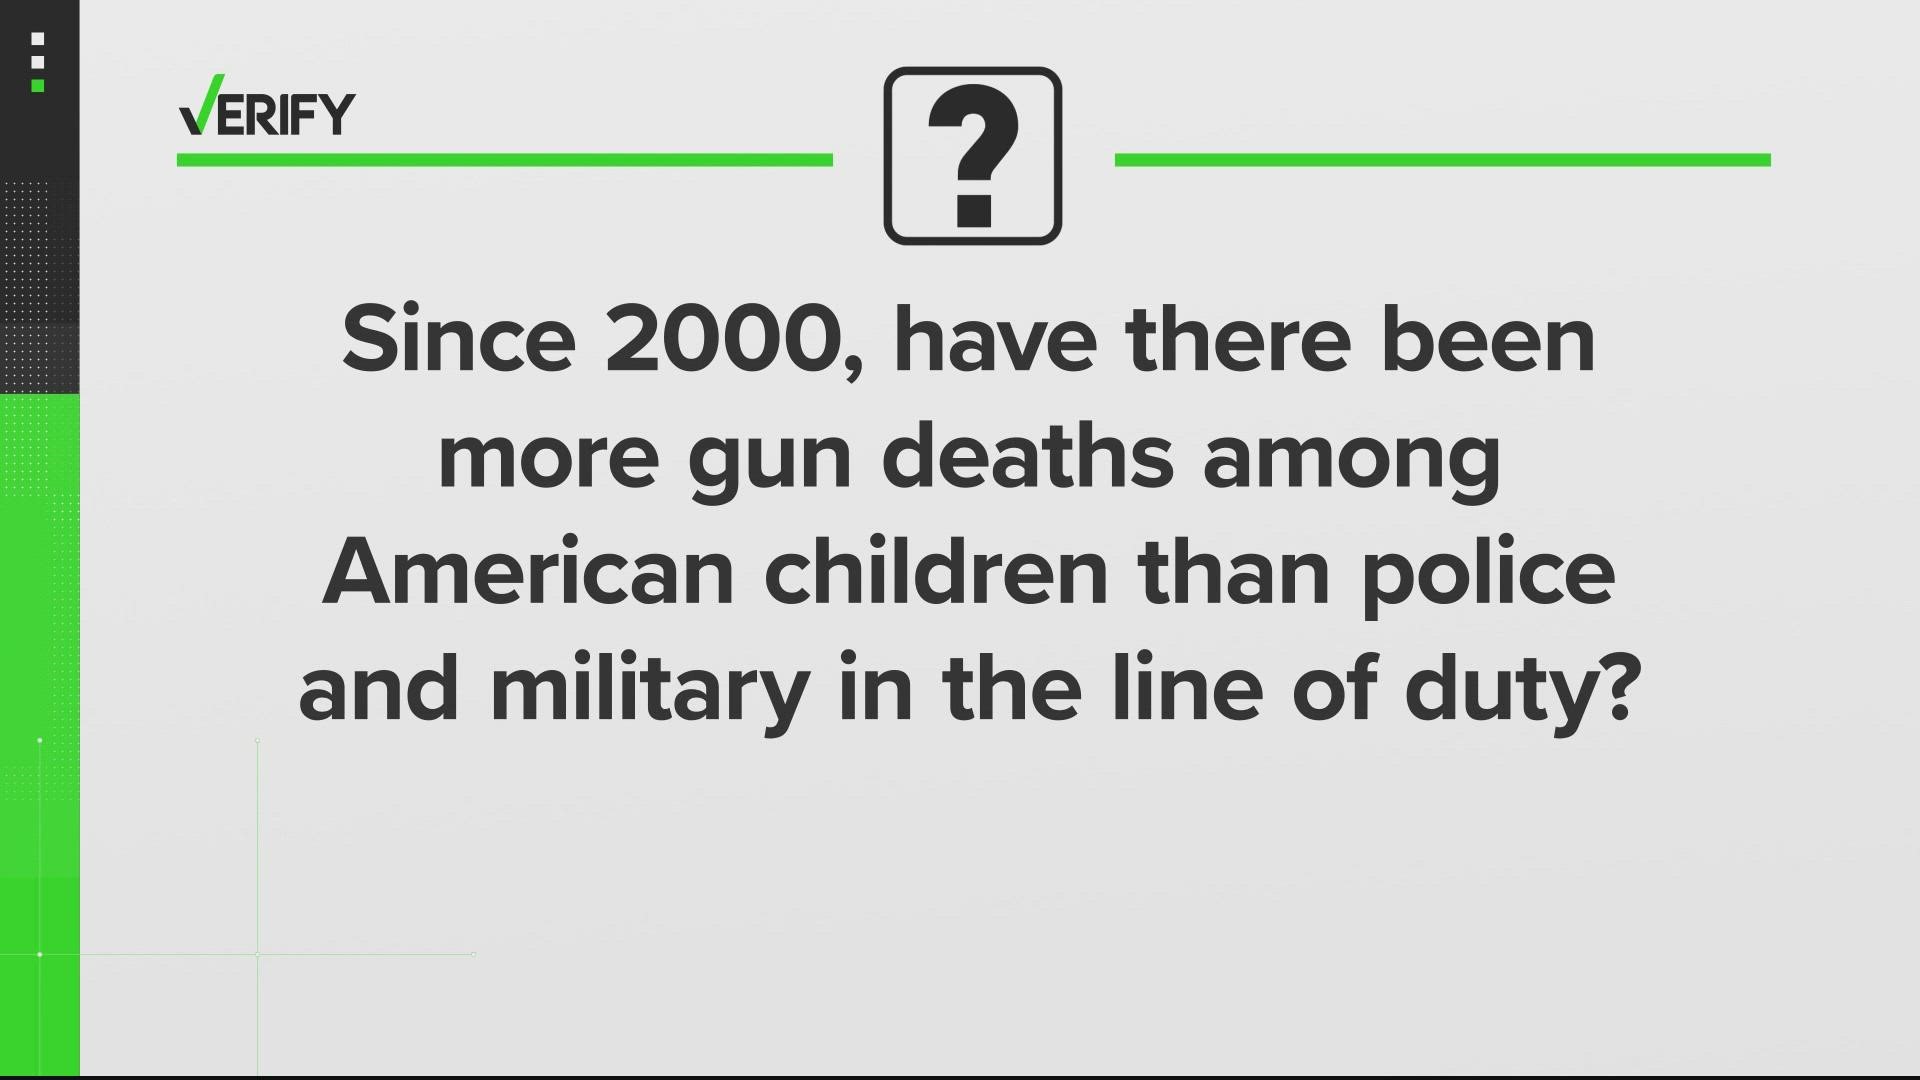 In the past two decades, there have been nearly four times more gun deaths among American children than among police and military in the line of duty combined.